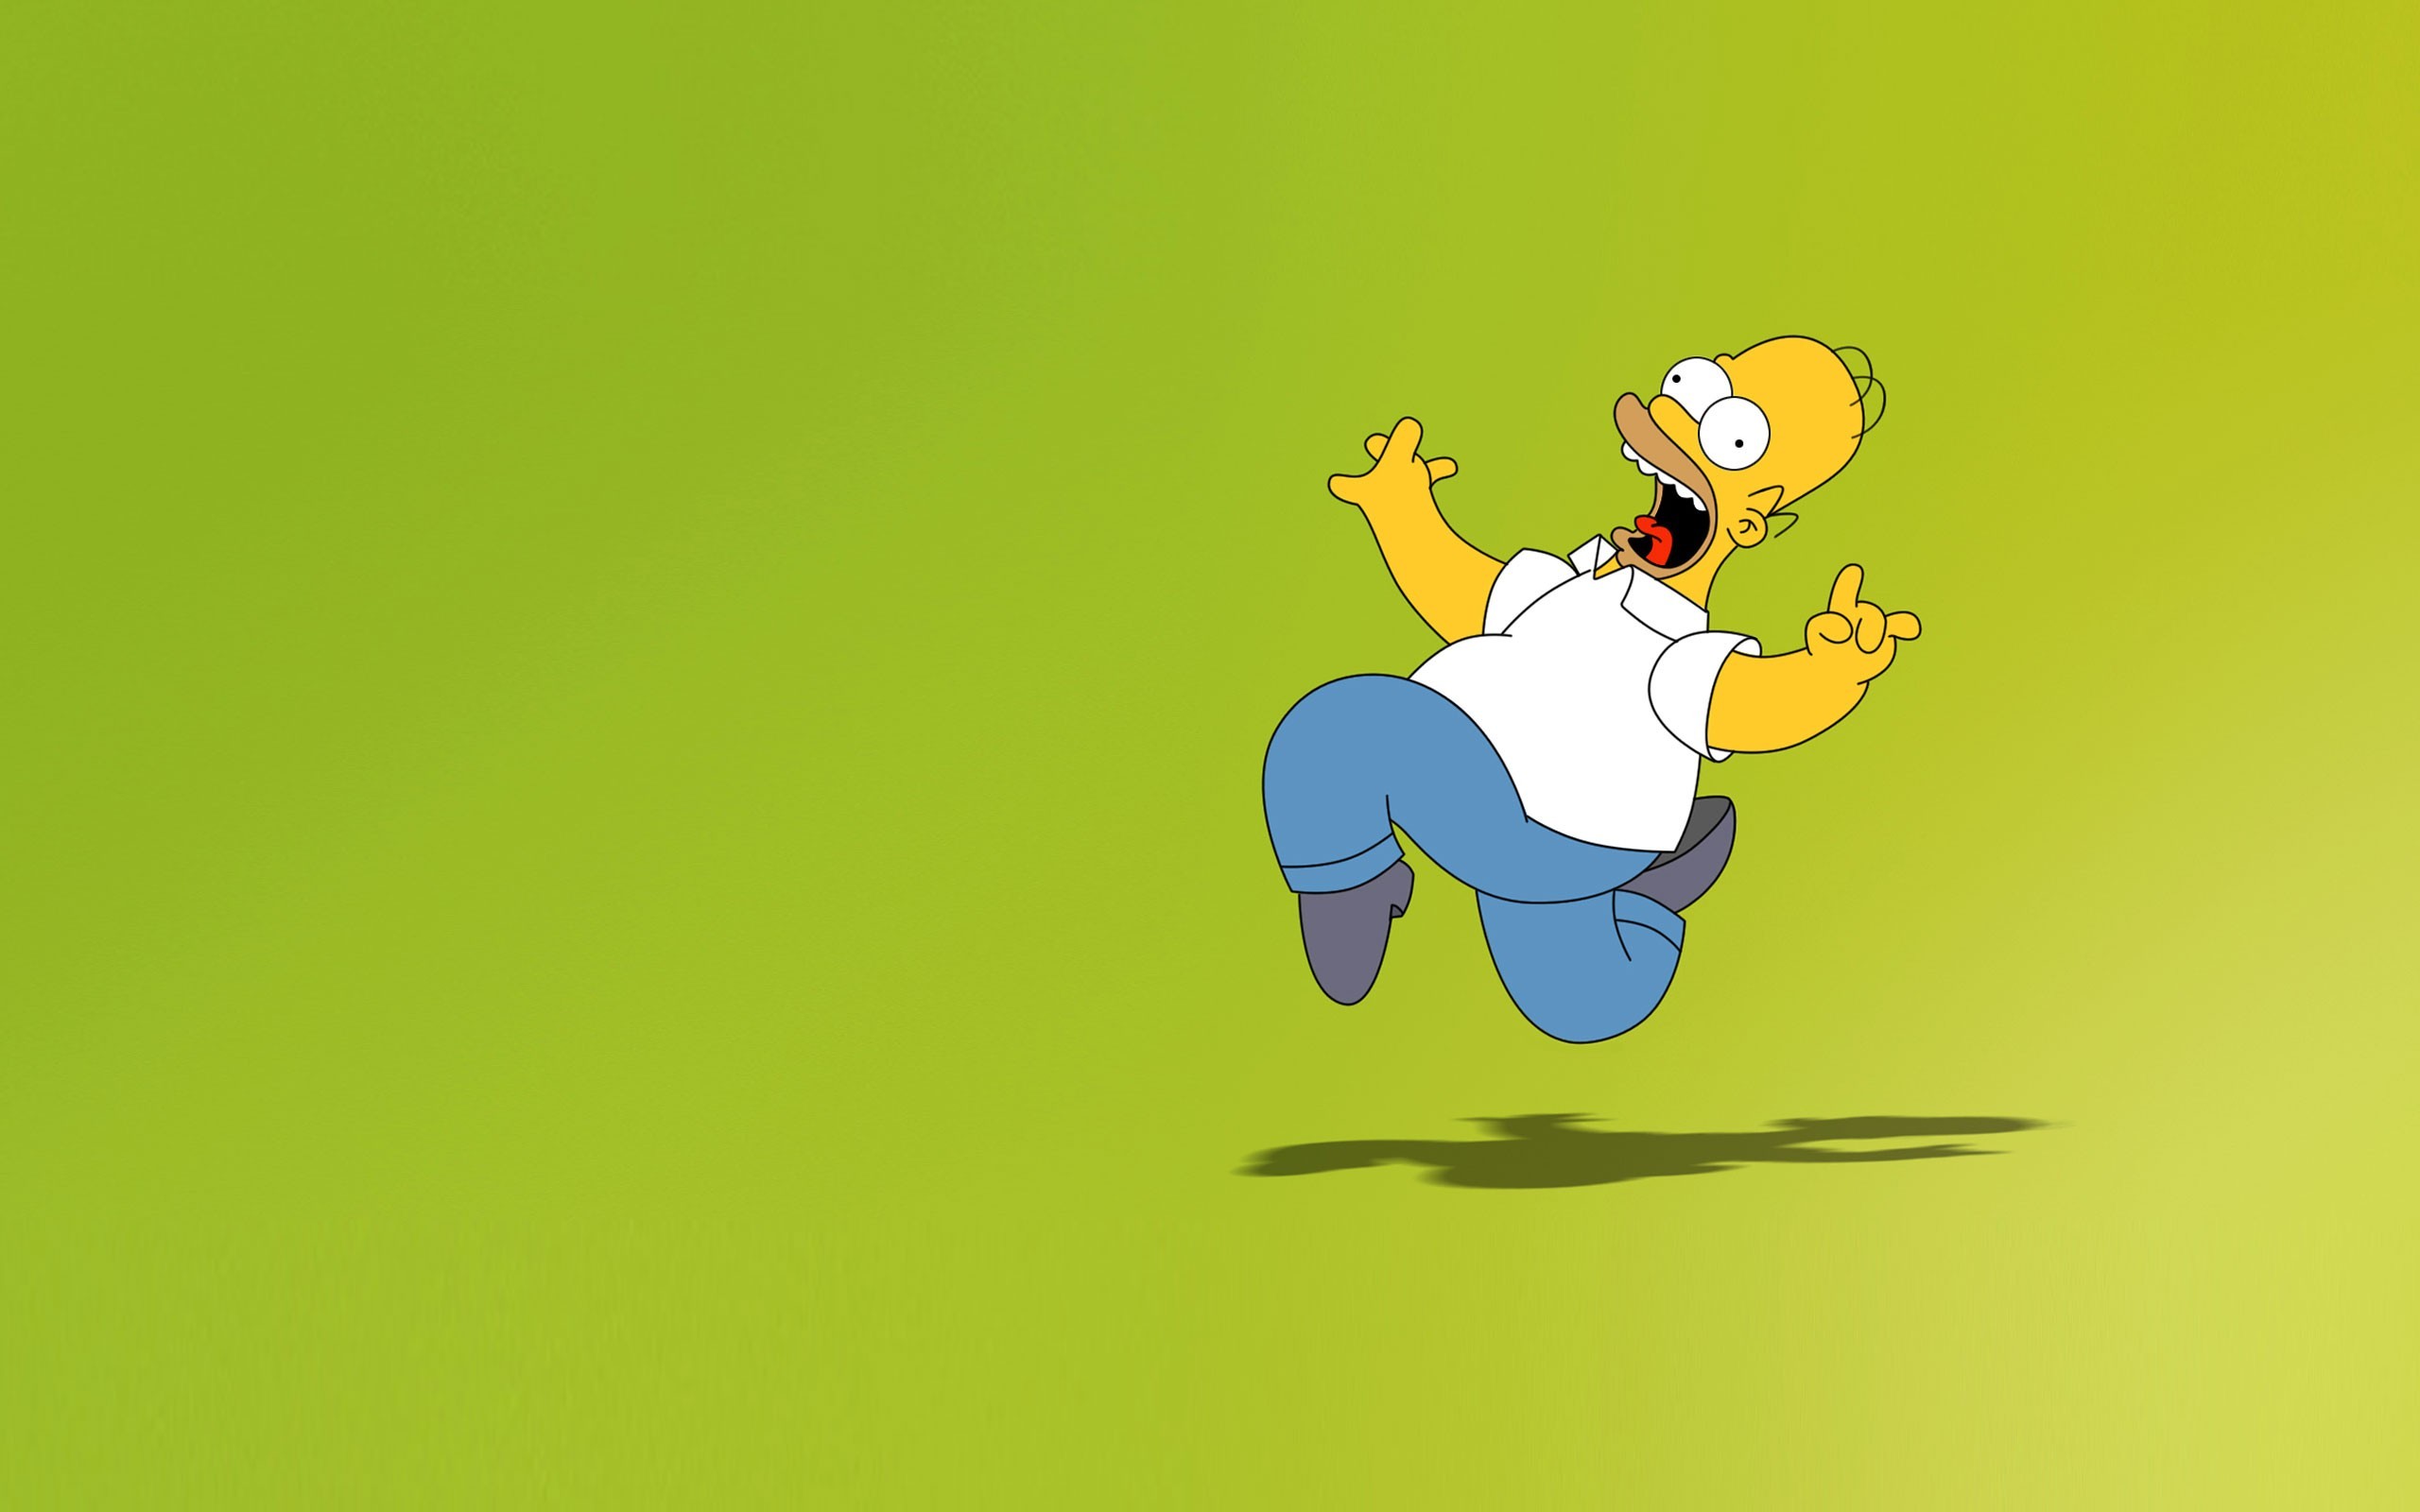 Simpsons Background Wallpaper Win10 Themes